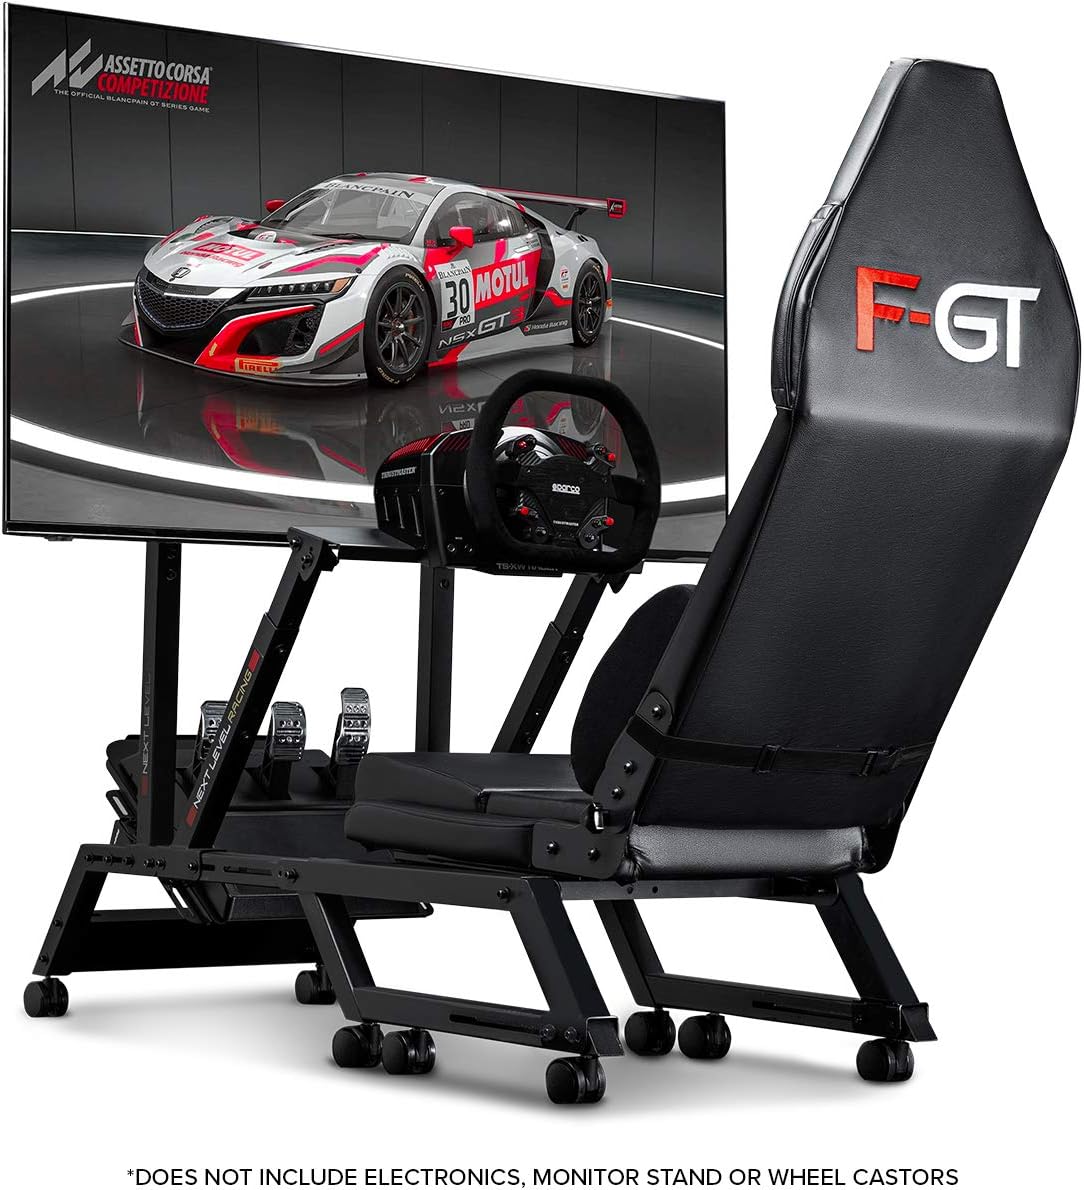 Next Level FGT Racing Simulator Cockpit - Experience Formula or GT Racing Positions 0667380785820